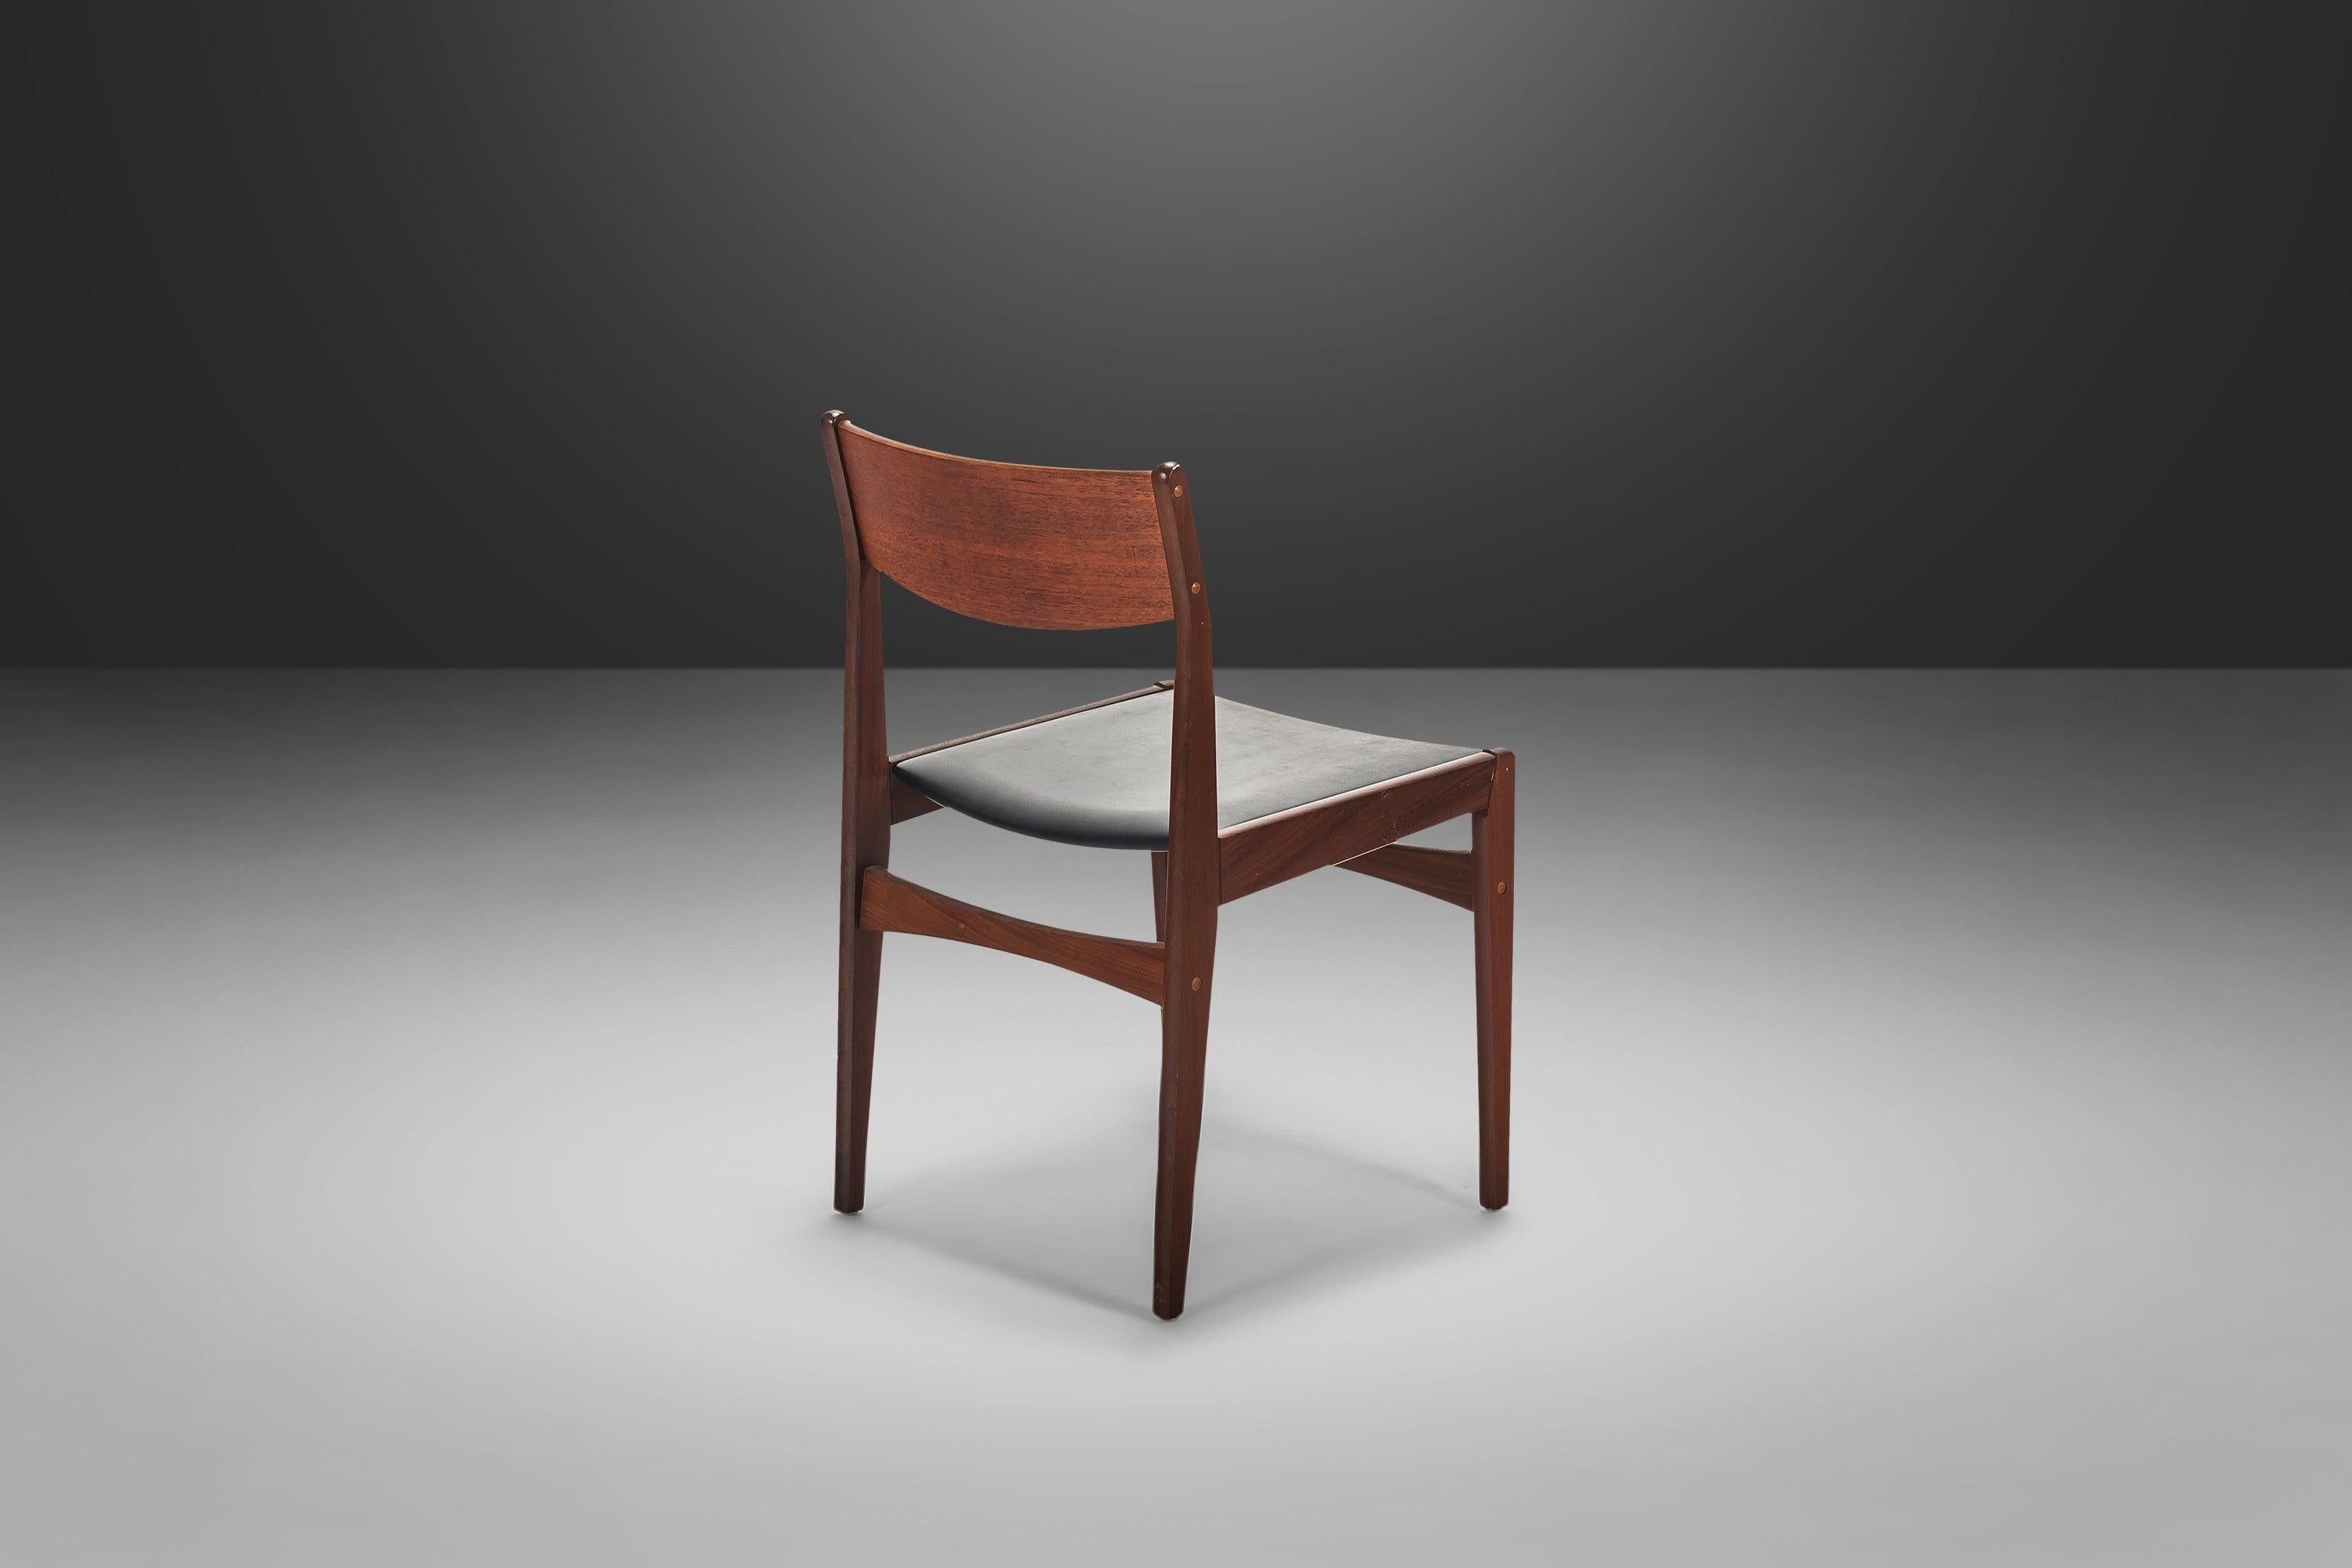 Danish Set of Six '6' Teak Dining Chairs Poul Volther for Frem Røjle, Denmark, c. 1960s